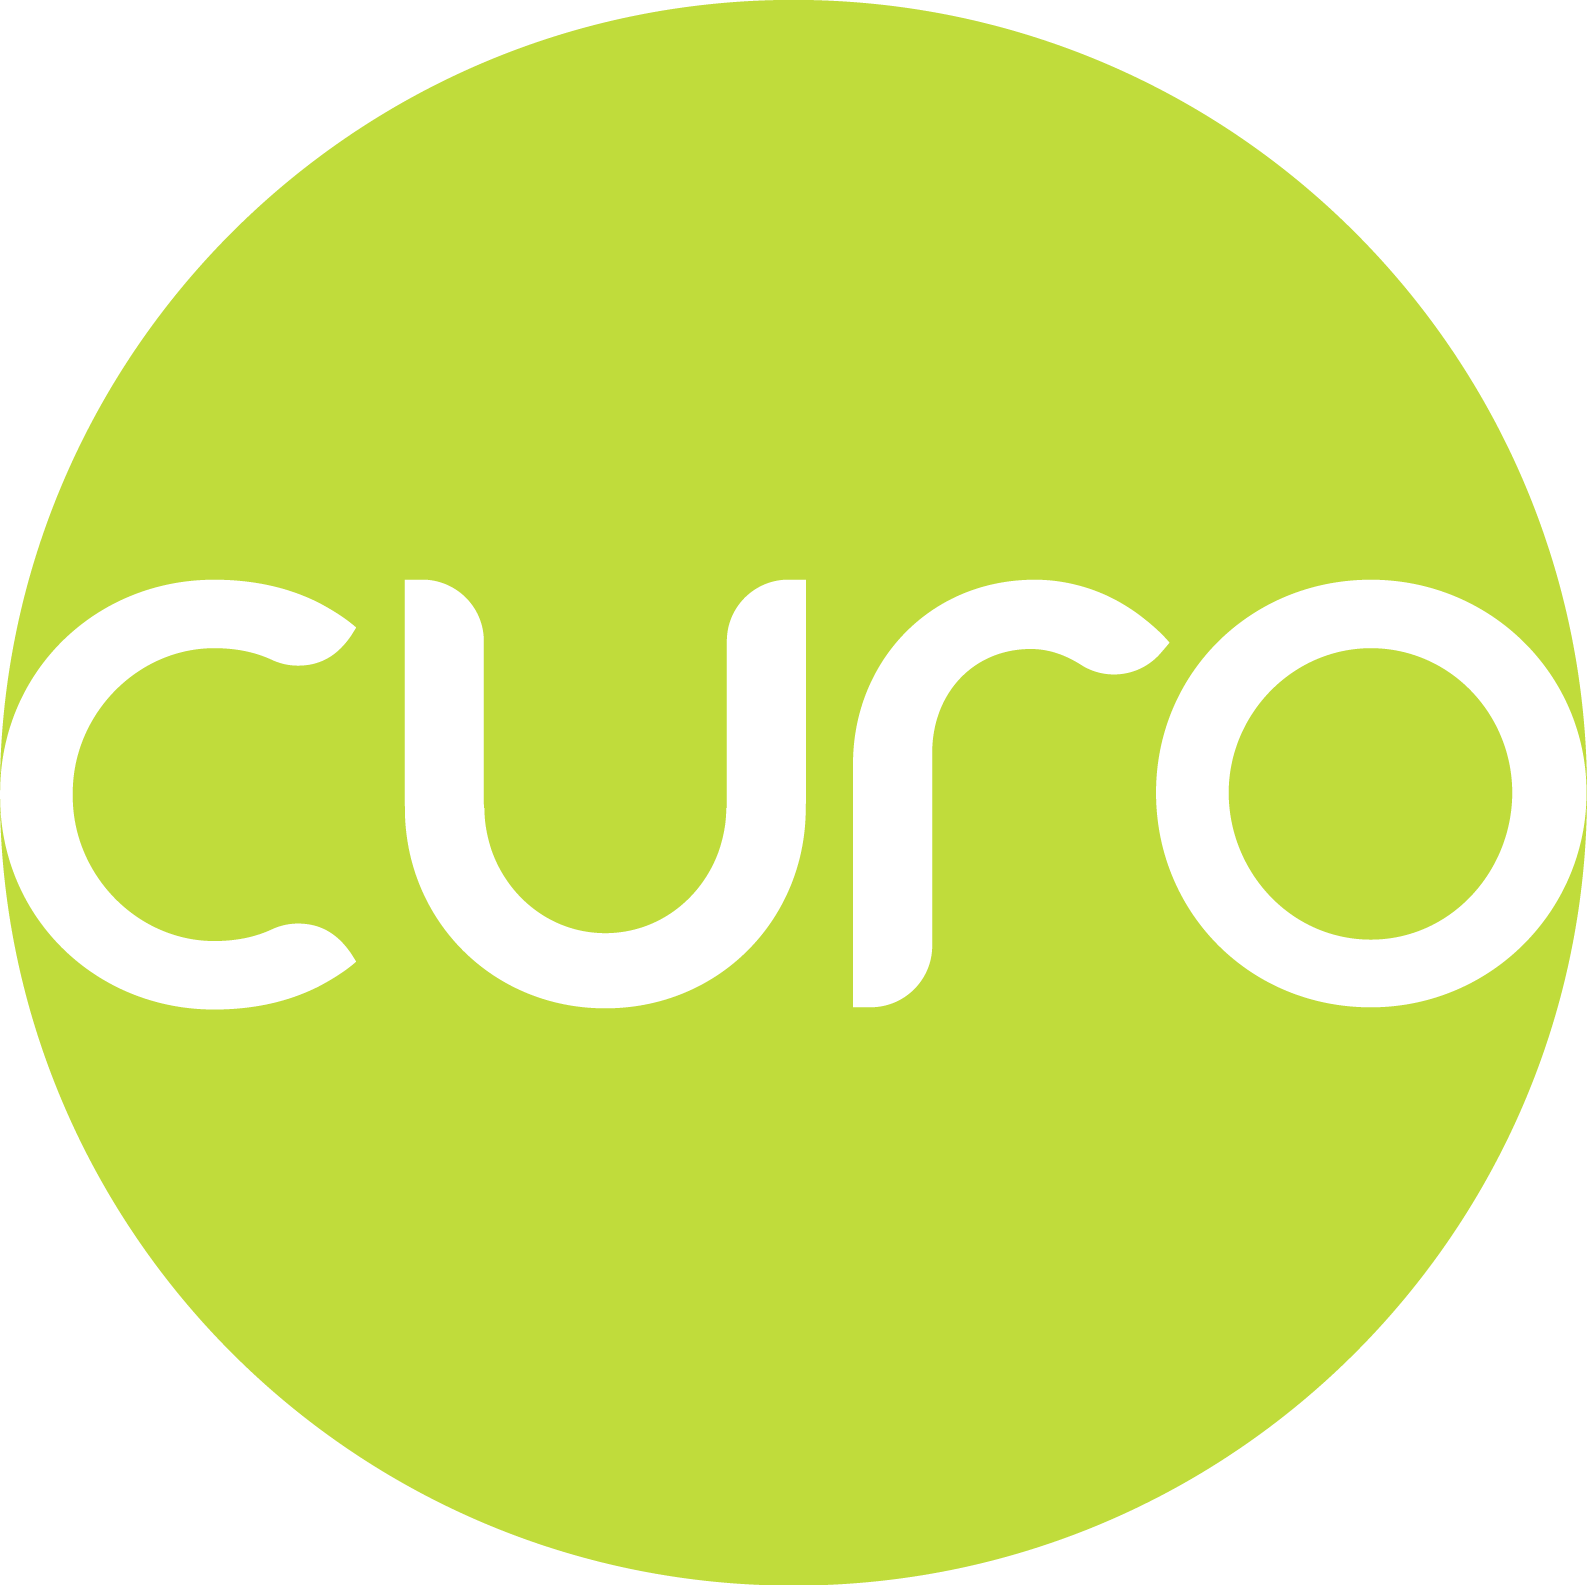 logo for Curo Group